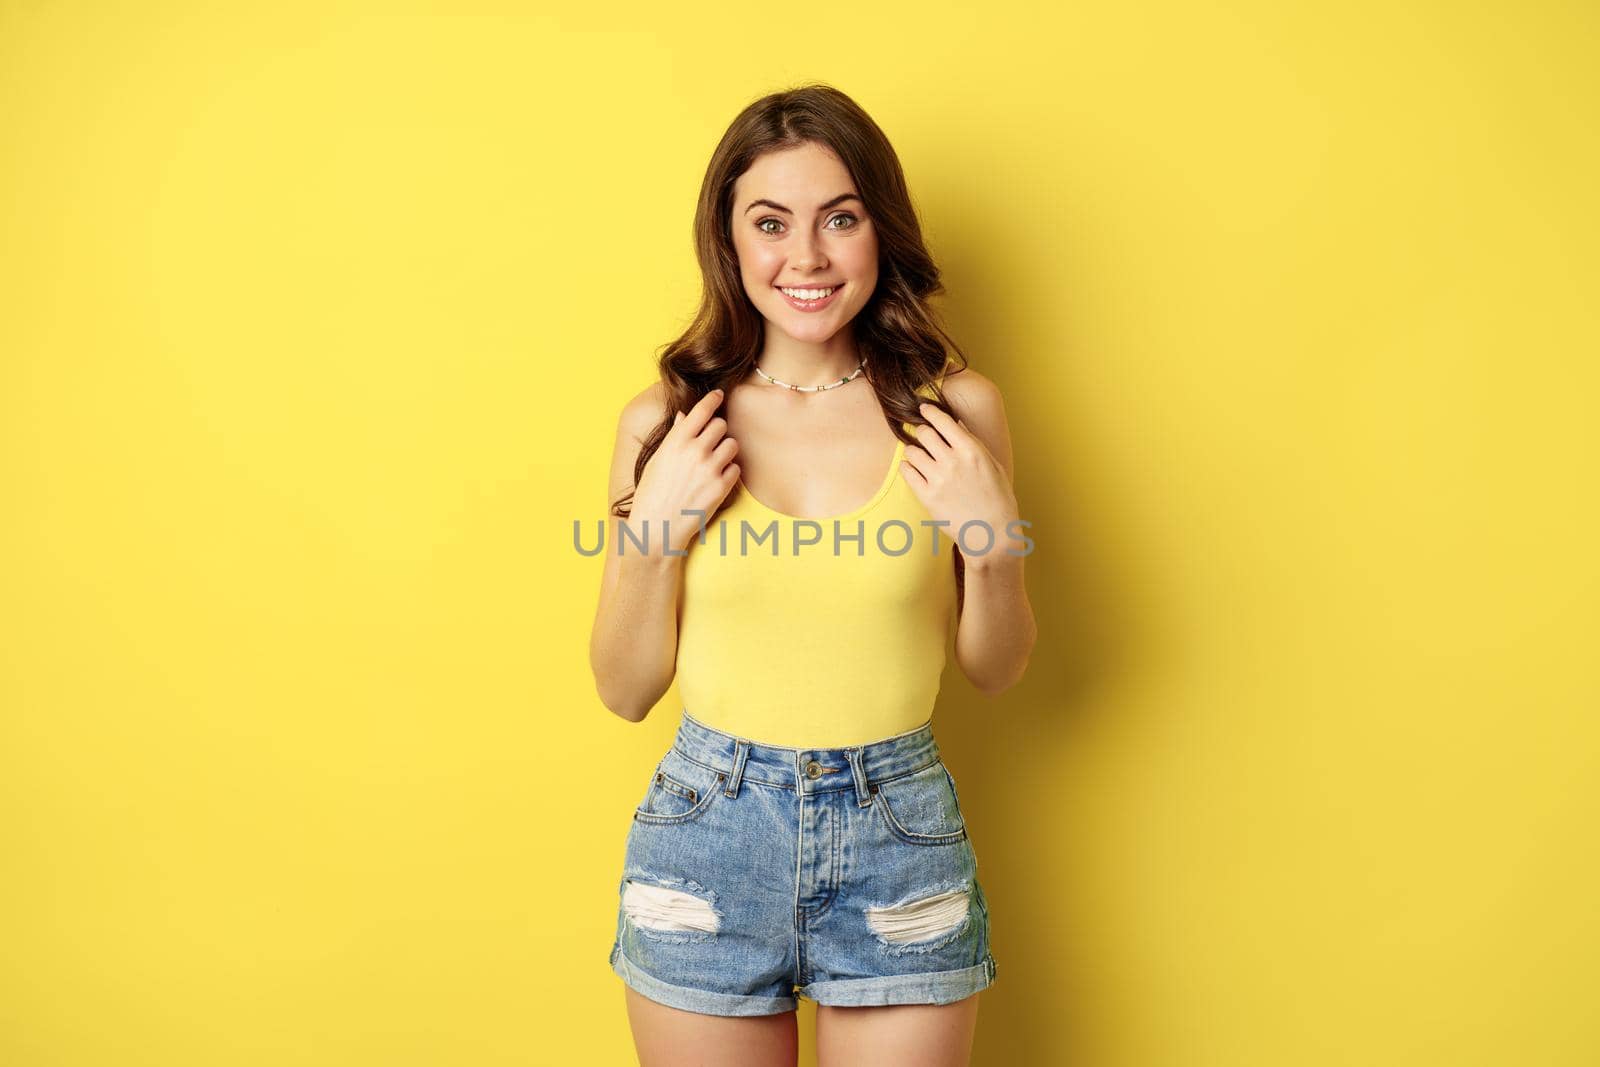 Portrait of enthusiastic, hopeful woman looking with yearning, smiling happy face, expecting smth, desire, standing over yellow background.